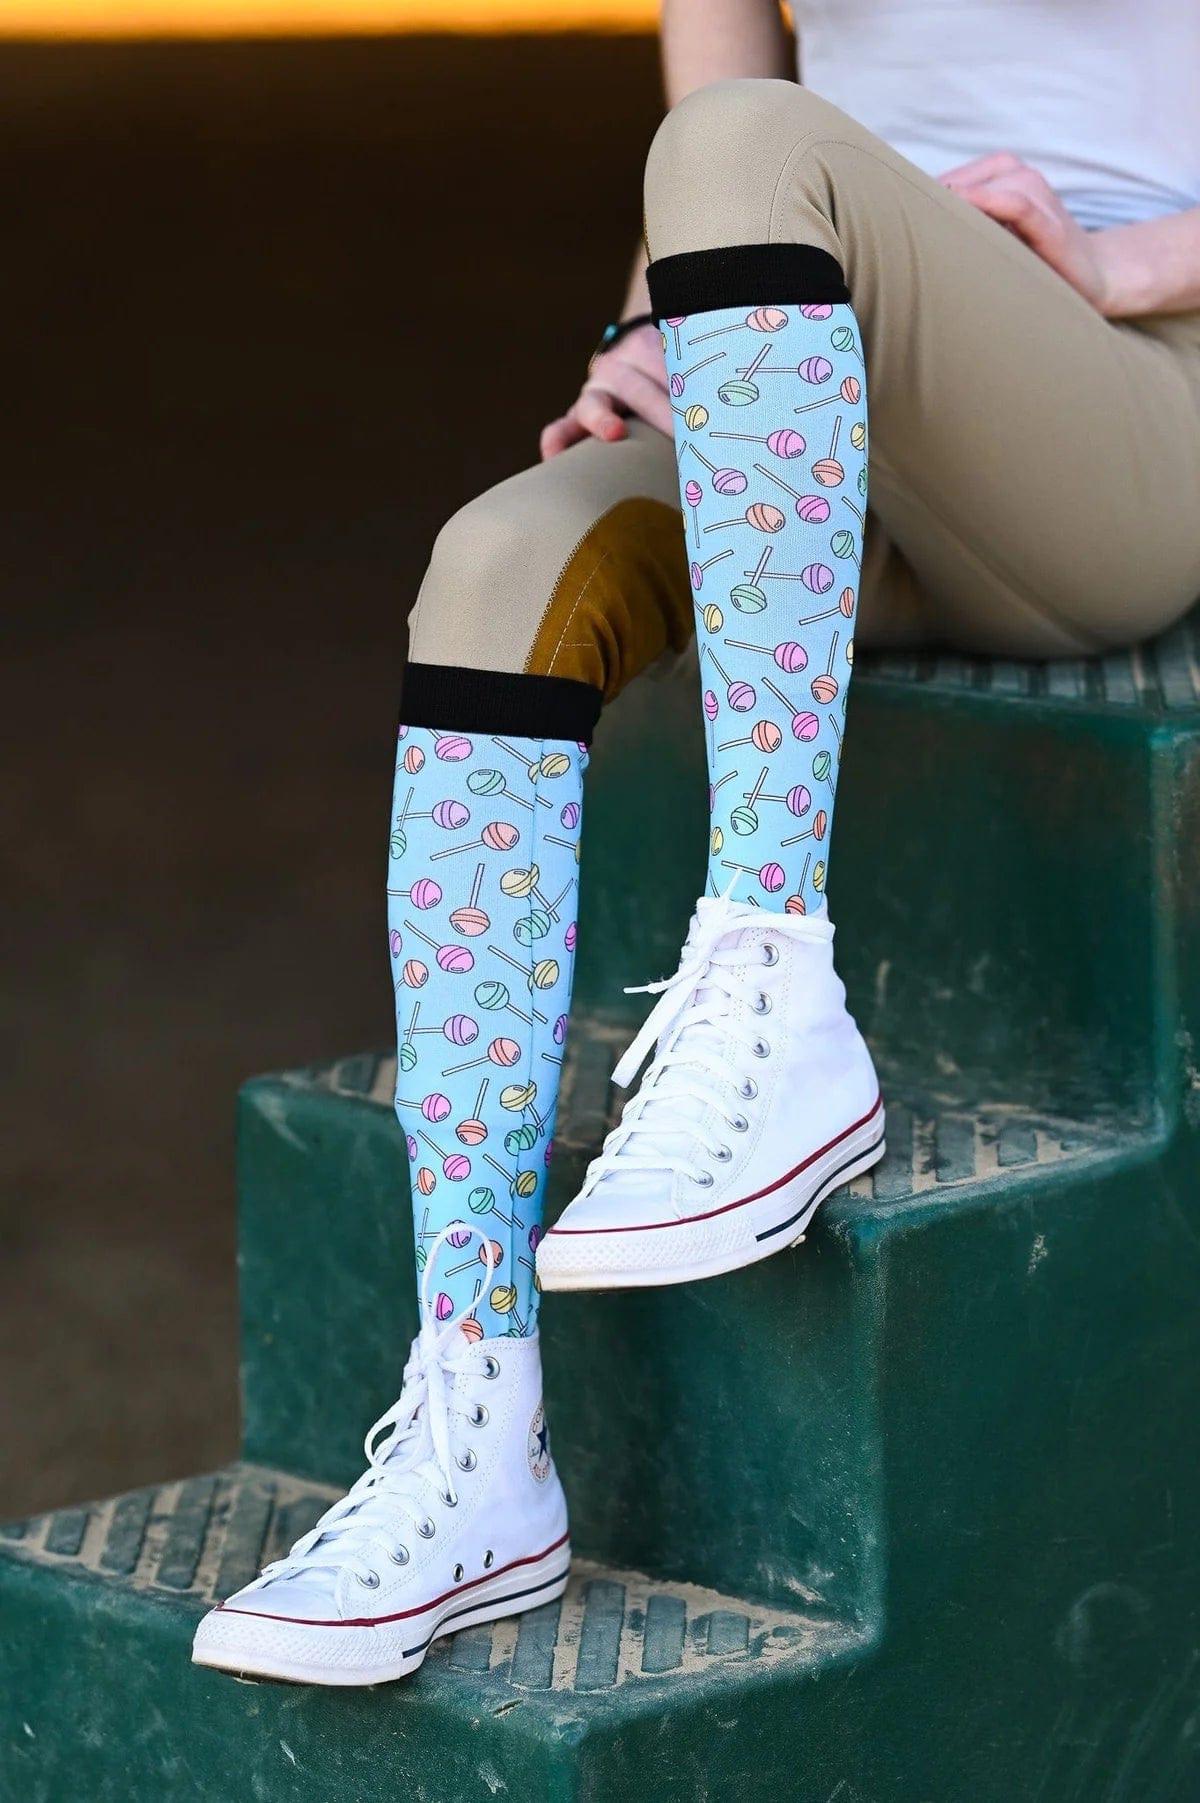 Dreamers & Schemers Socks Dreamers & Schemers- Sucker equestrian team apparel online tack store mobile tack store custom farm apparel custom show stable clothing equestrian lifestyle horse show clothing riding clothes horses equestrian tack store